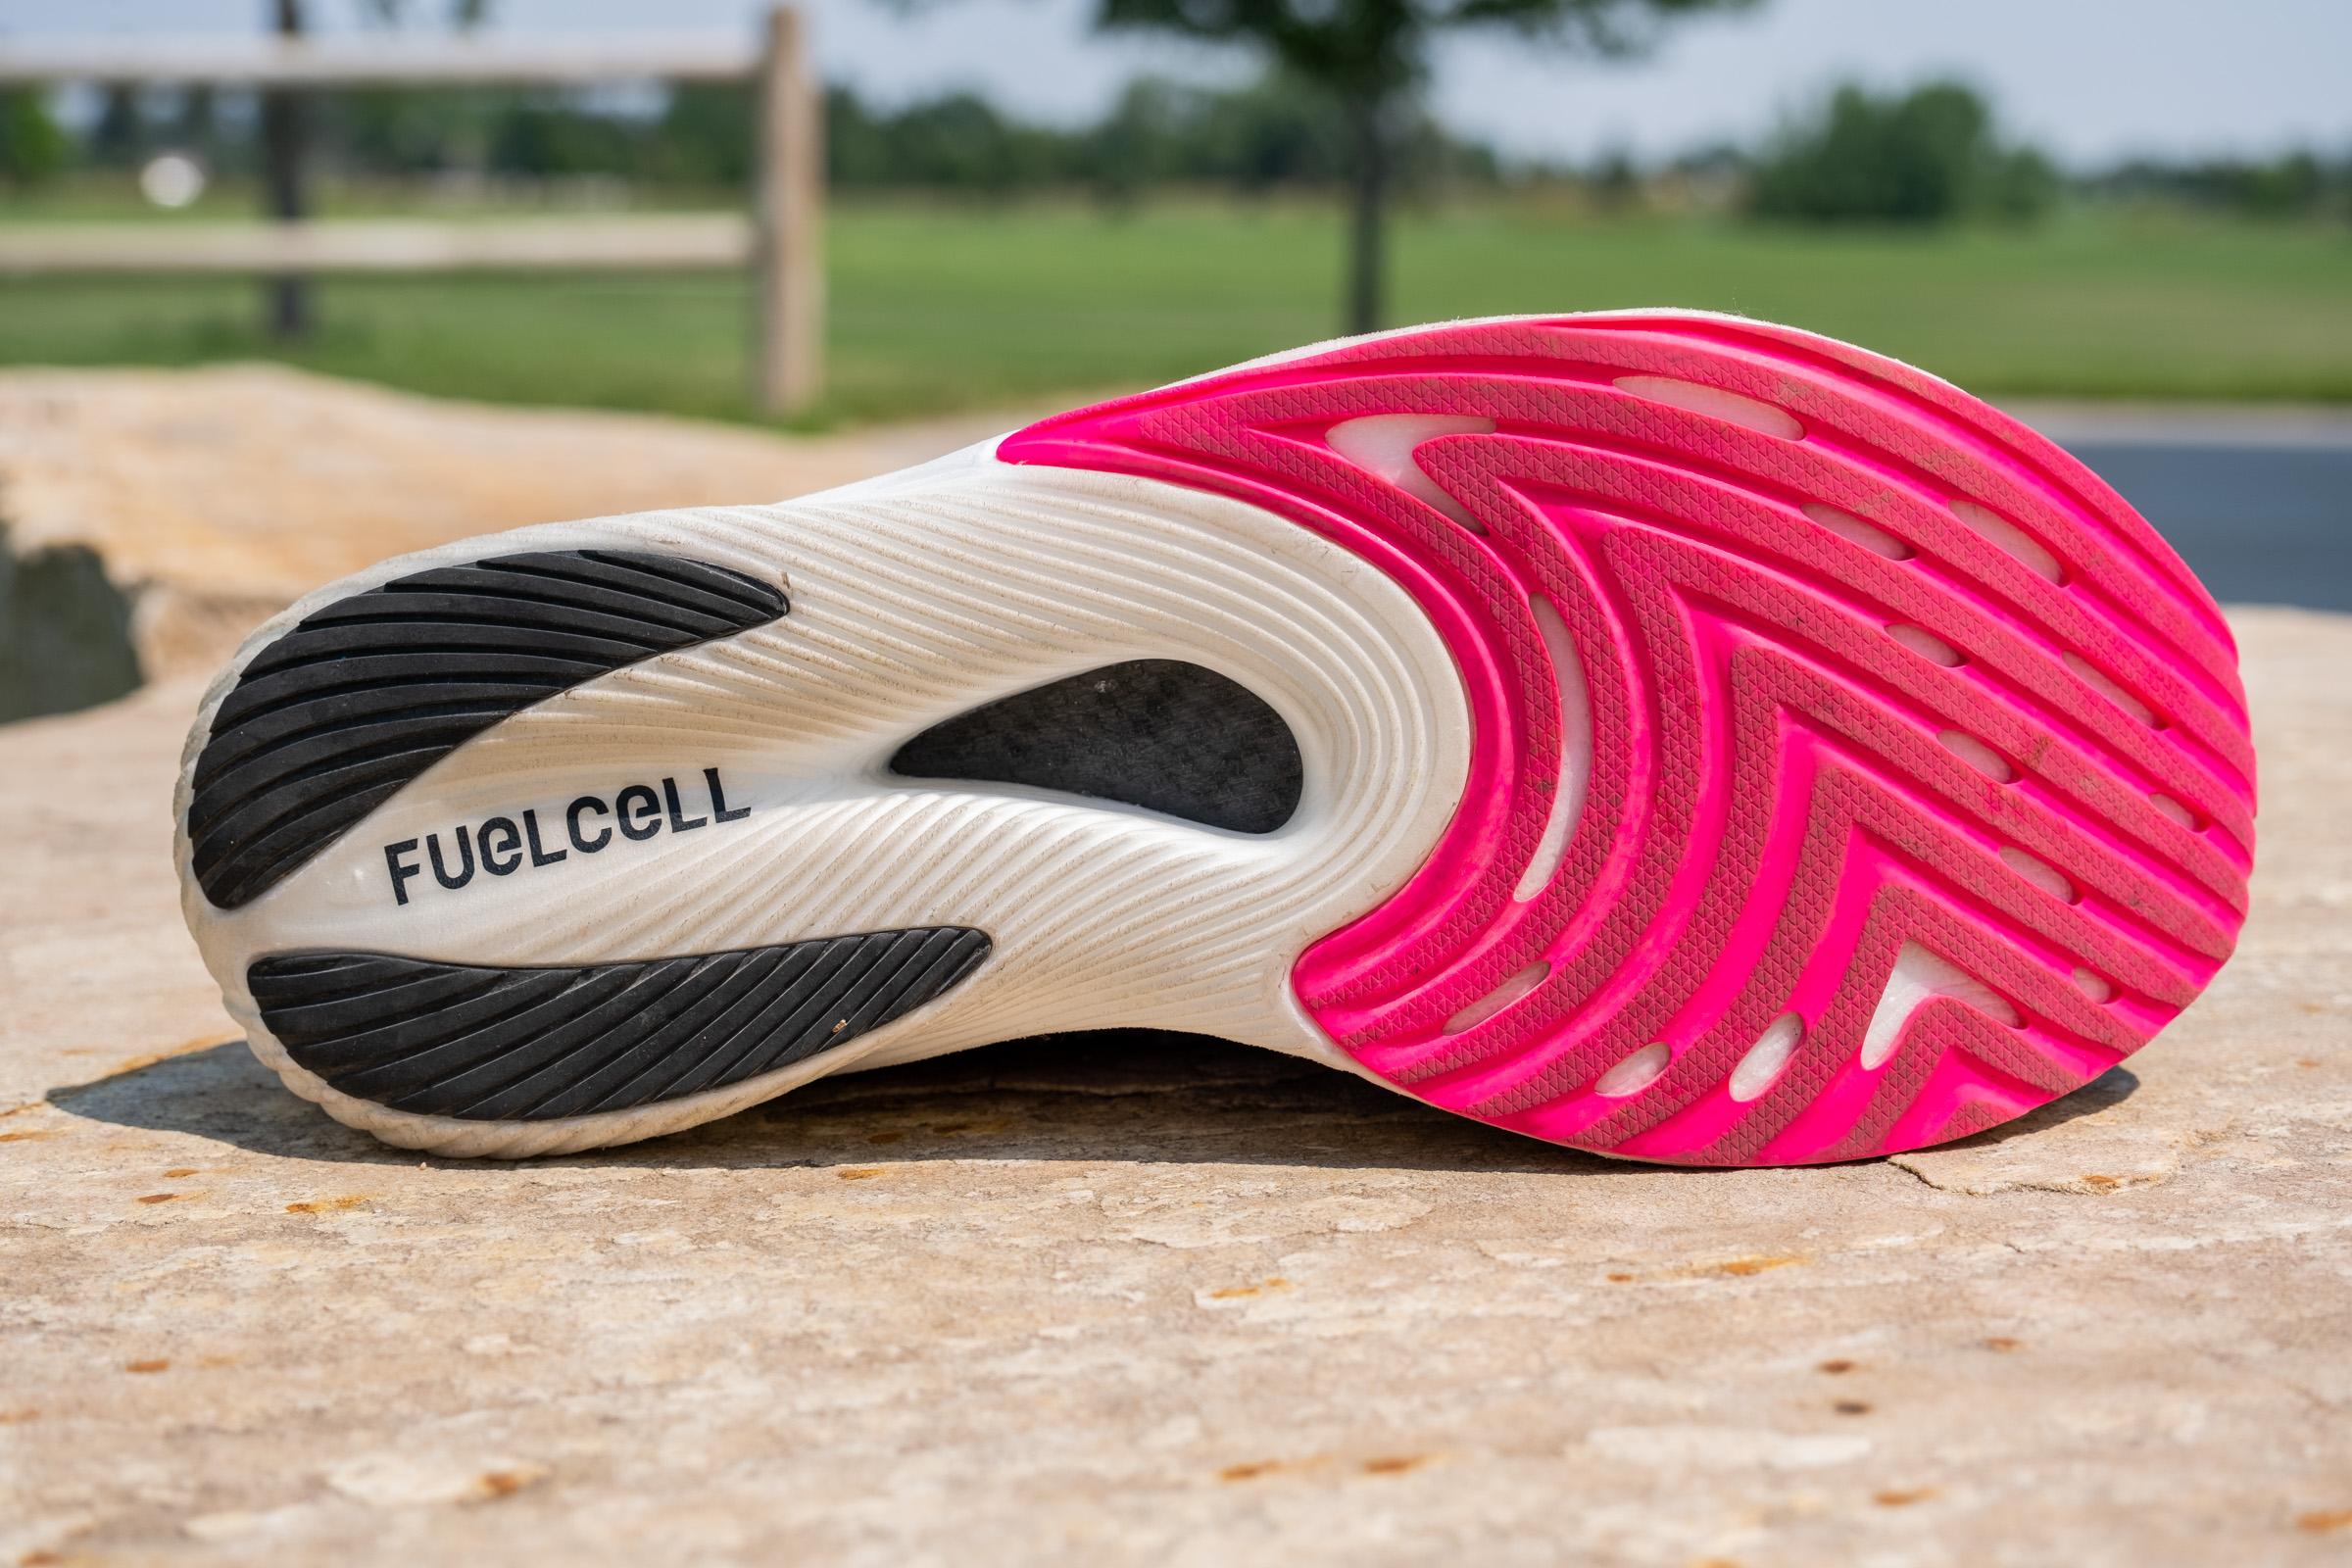 Cut in half: New Balance FuelCell RC Elite v2 Review (2023